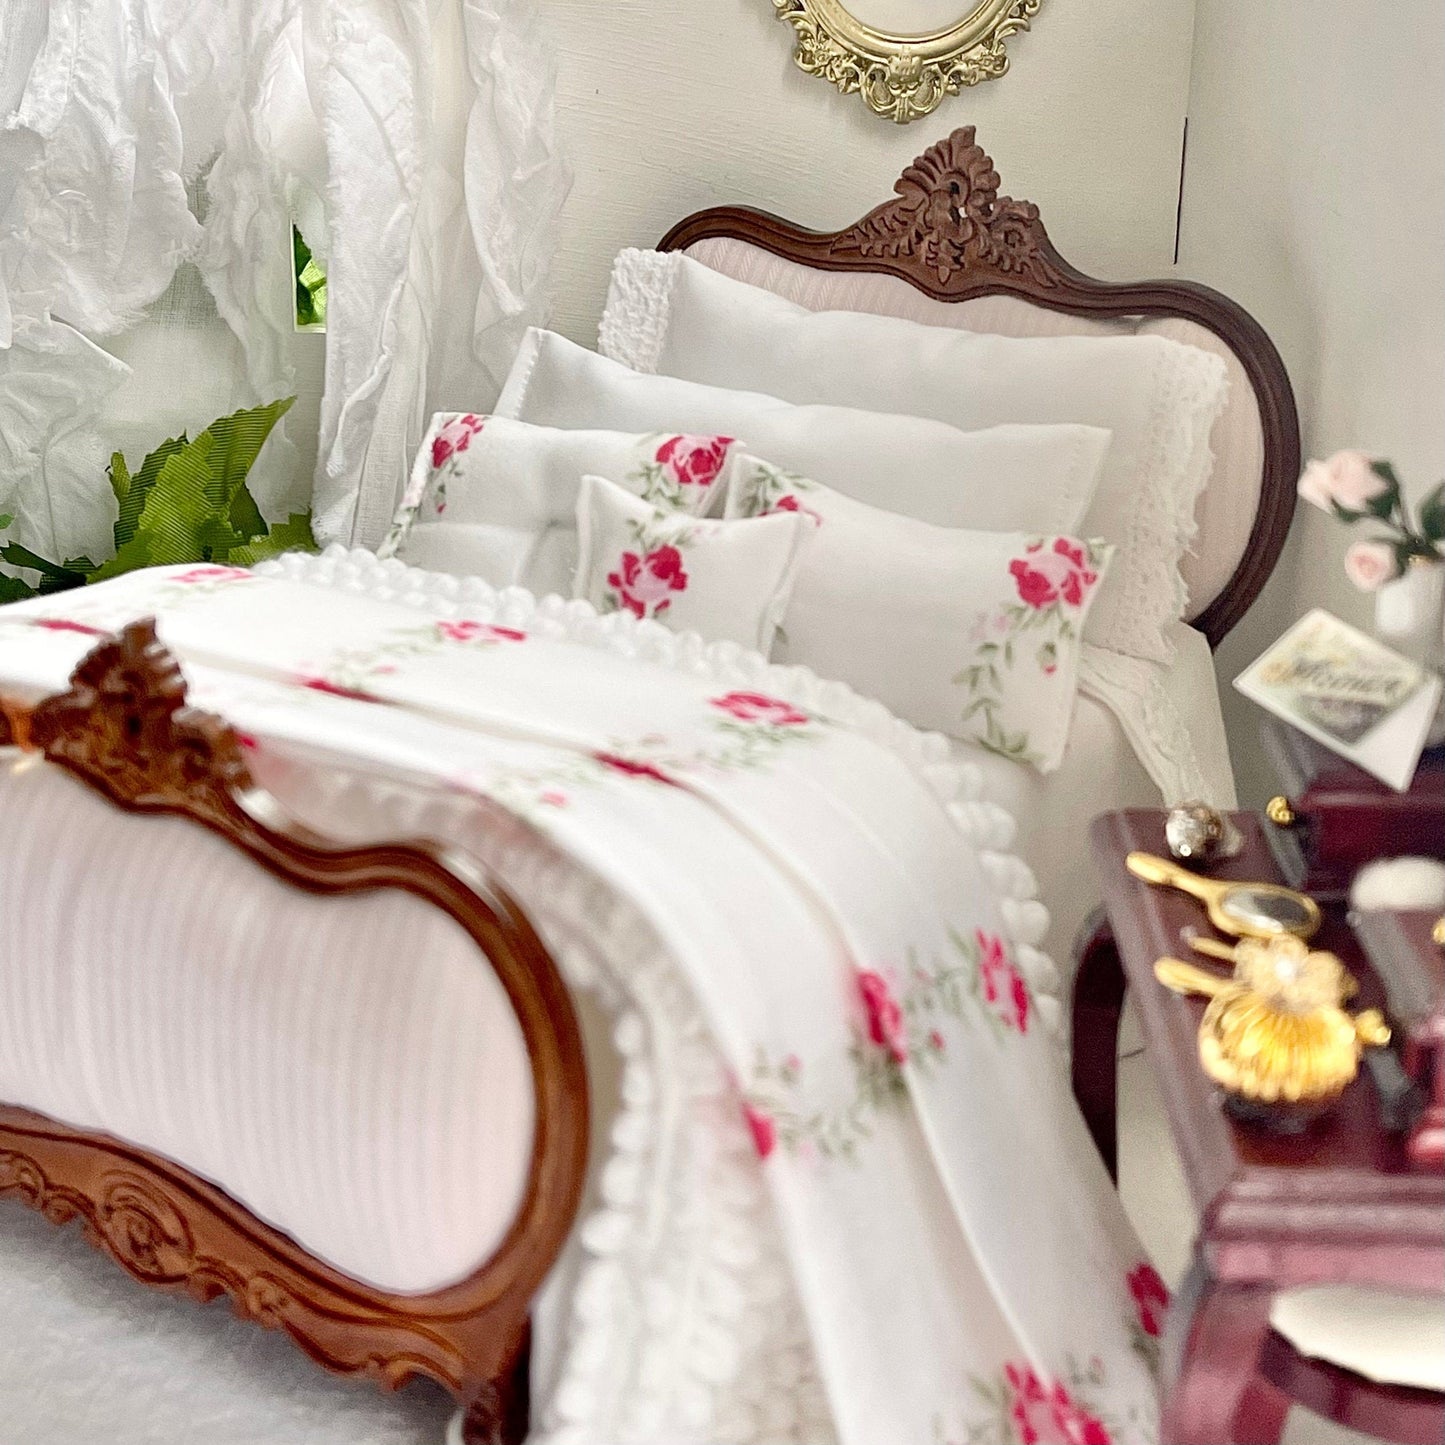 Chantallena Doll House Shabby Cottage - Eight Piece Shabby White Cotton Bedding Set with Dark Pink Roses Bed Runner